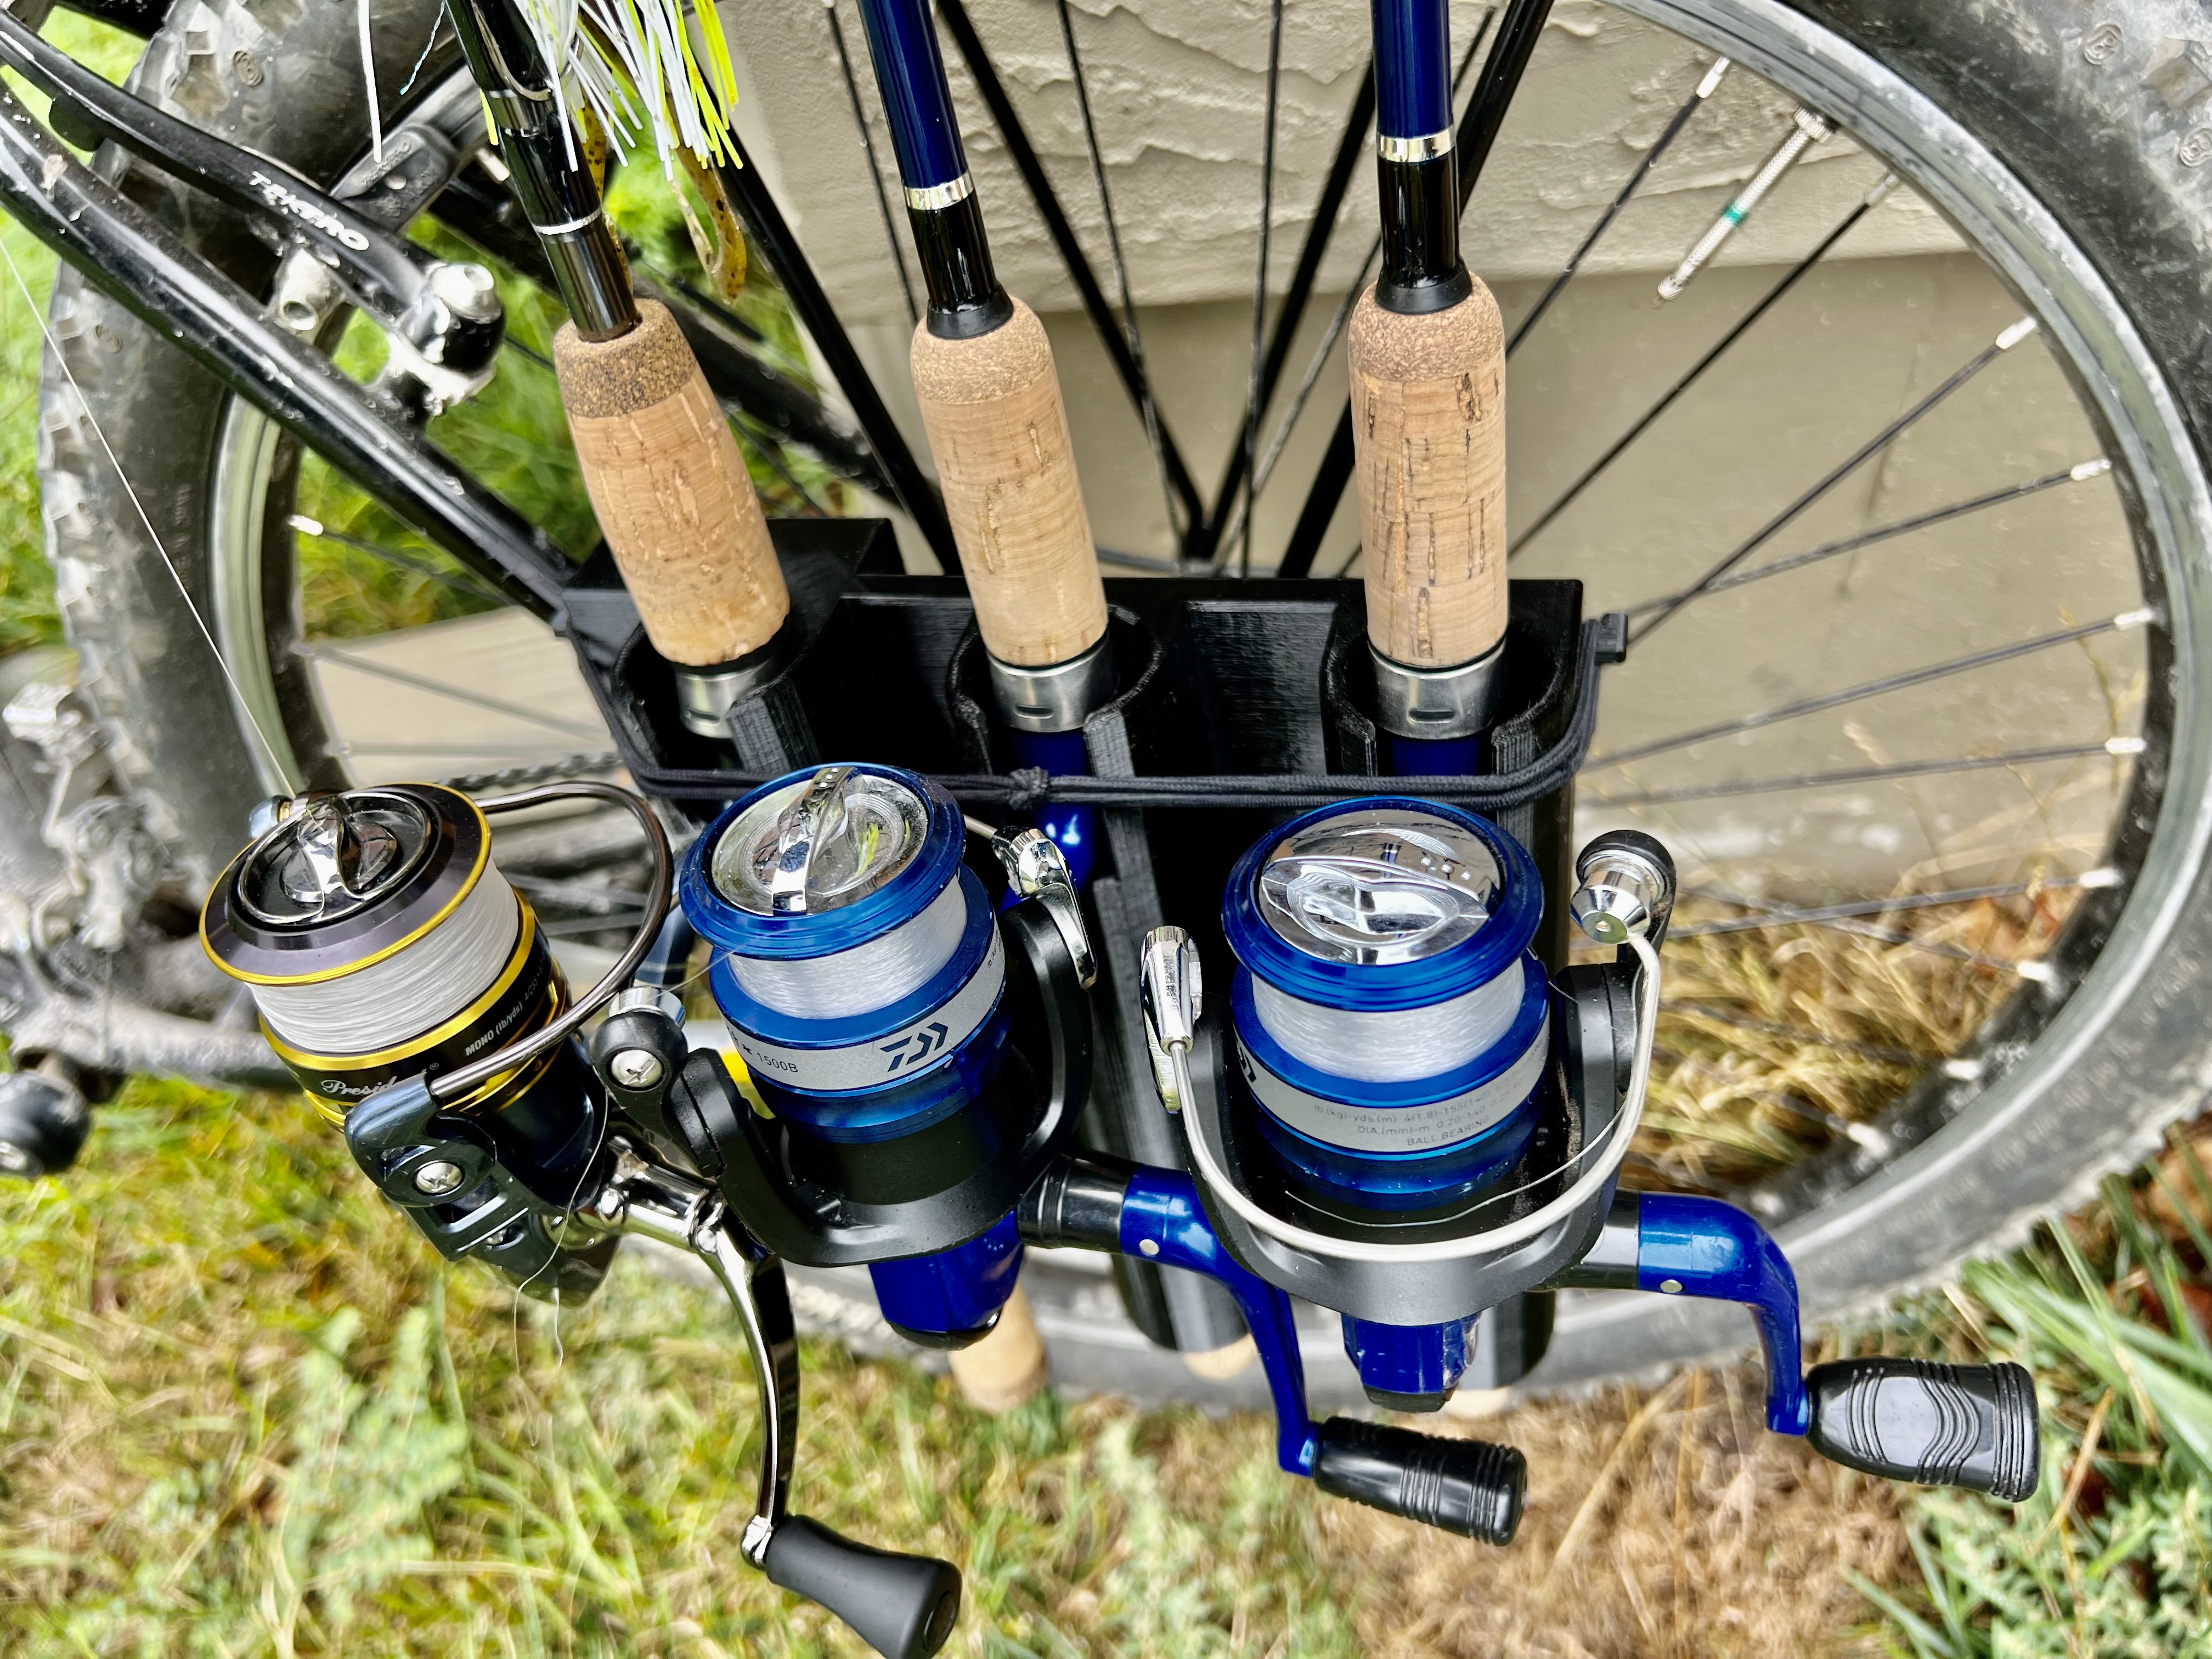  Bike Fishing Rod Holder-Fishing Rods are Securely